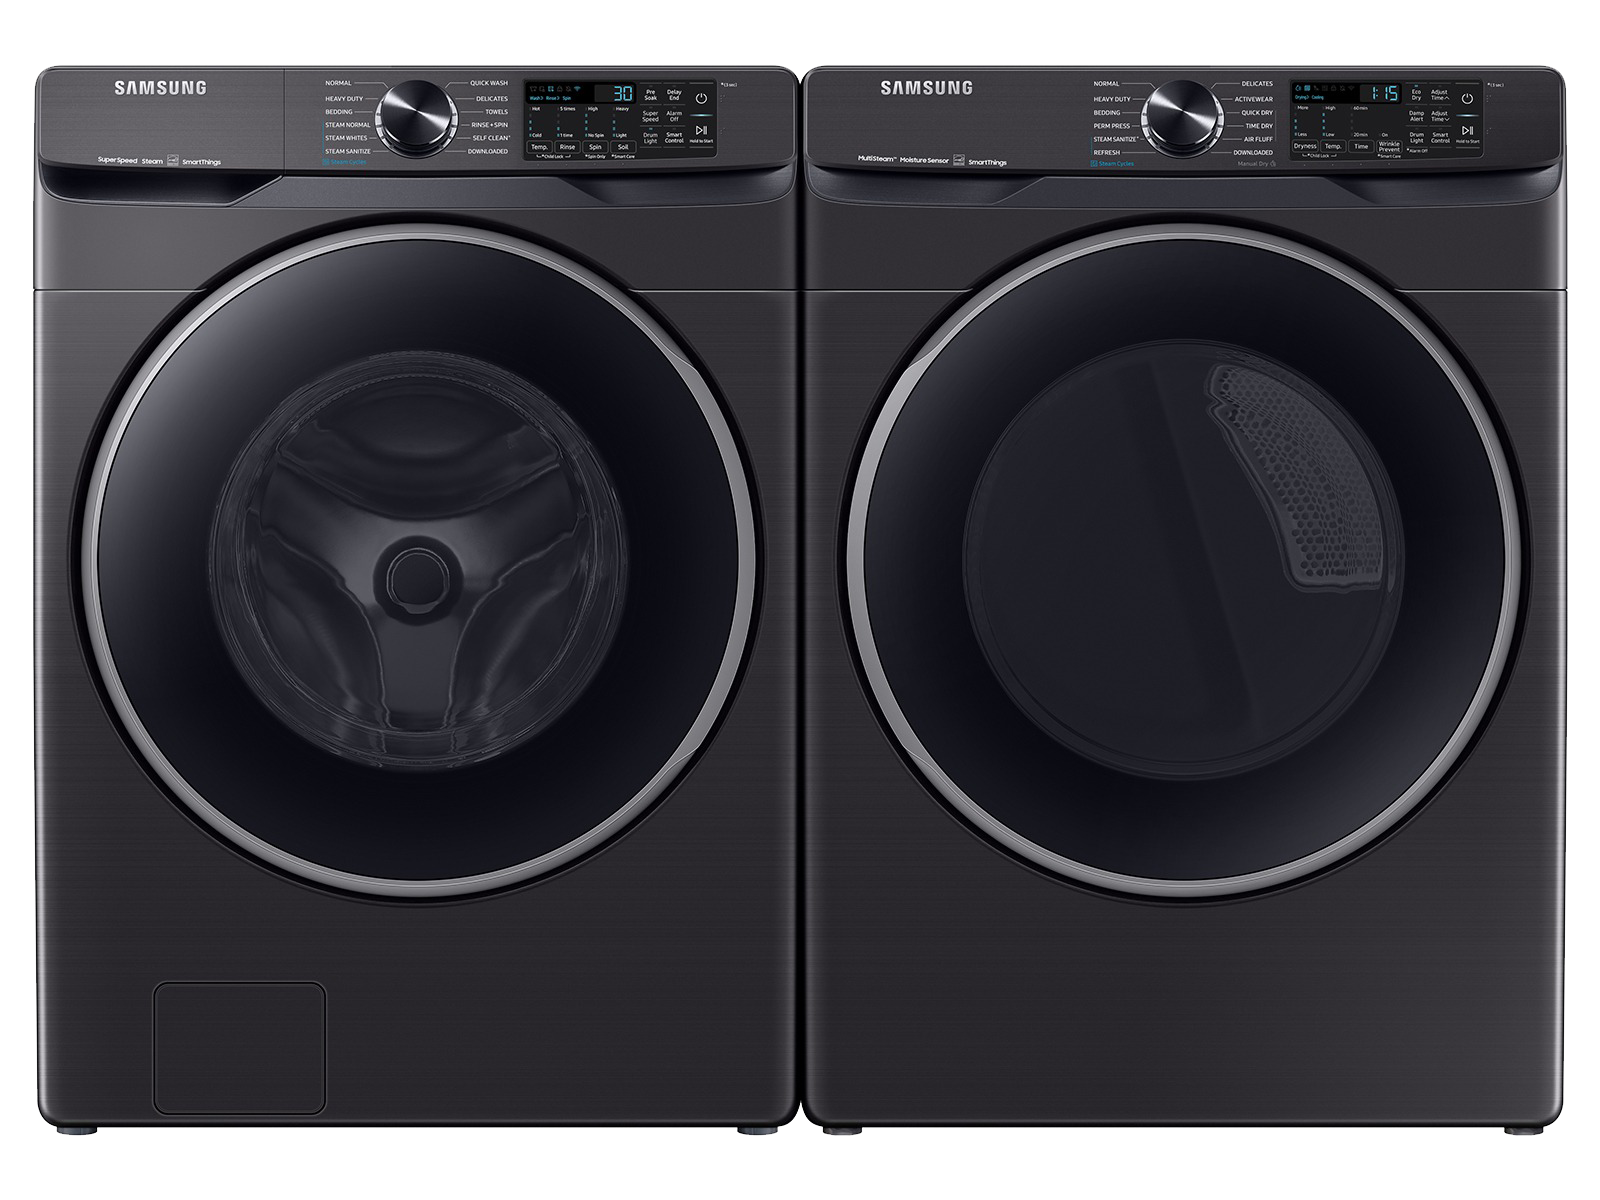 Photos - Tumble Dryer Samsung Smart Front Load Super Speed Wash Washer and Smart Steam Sanitize+ 